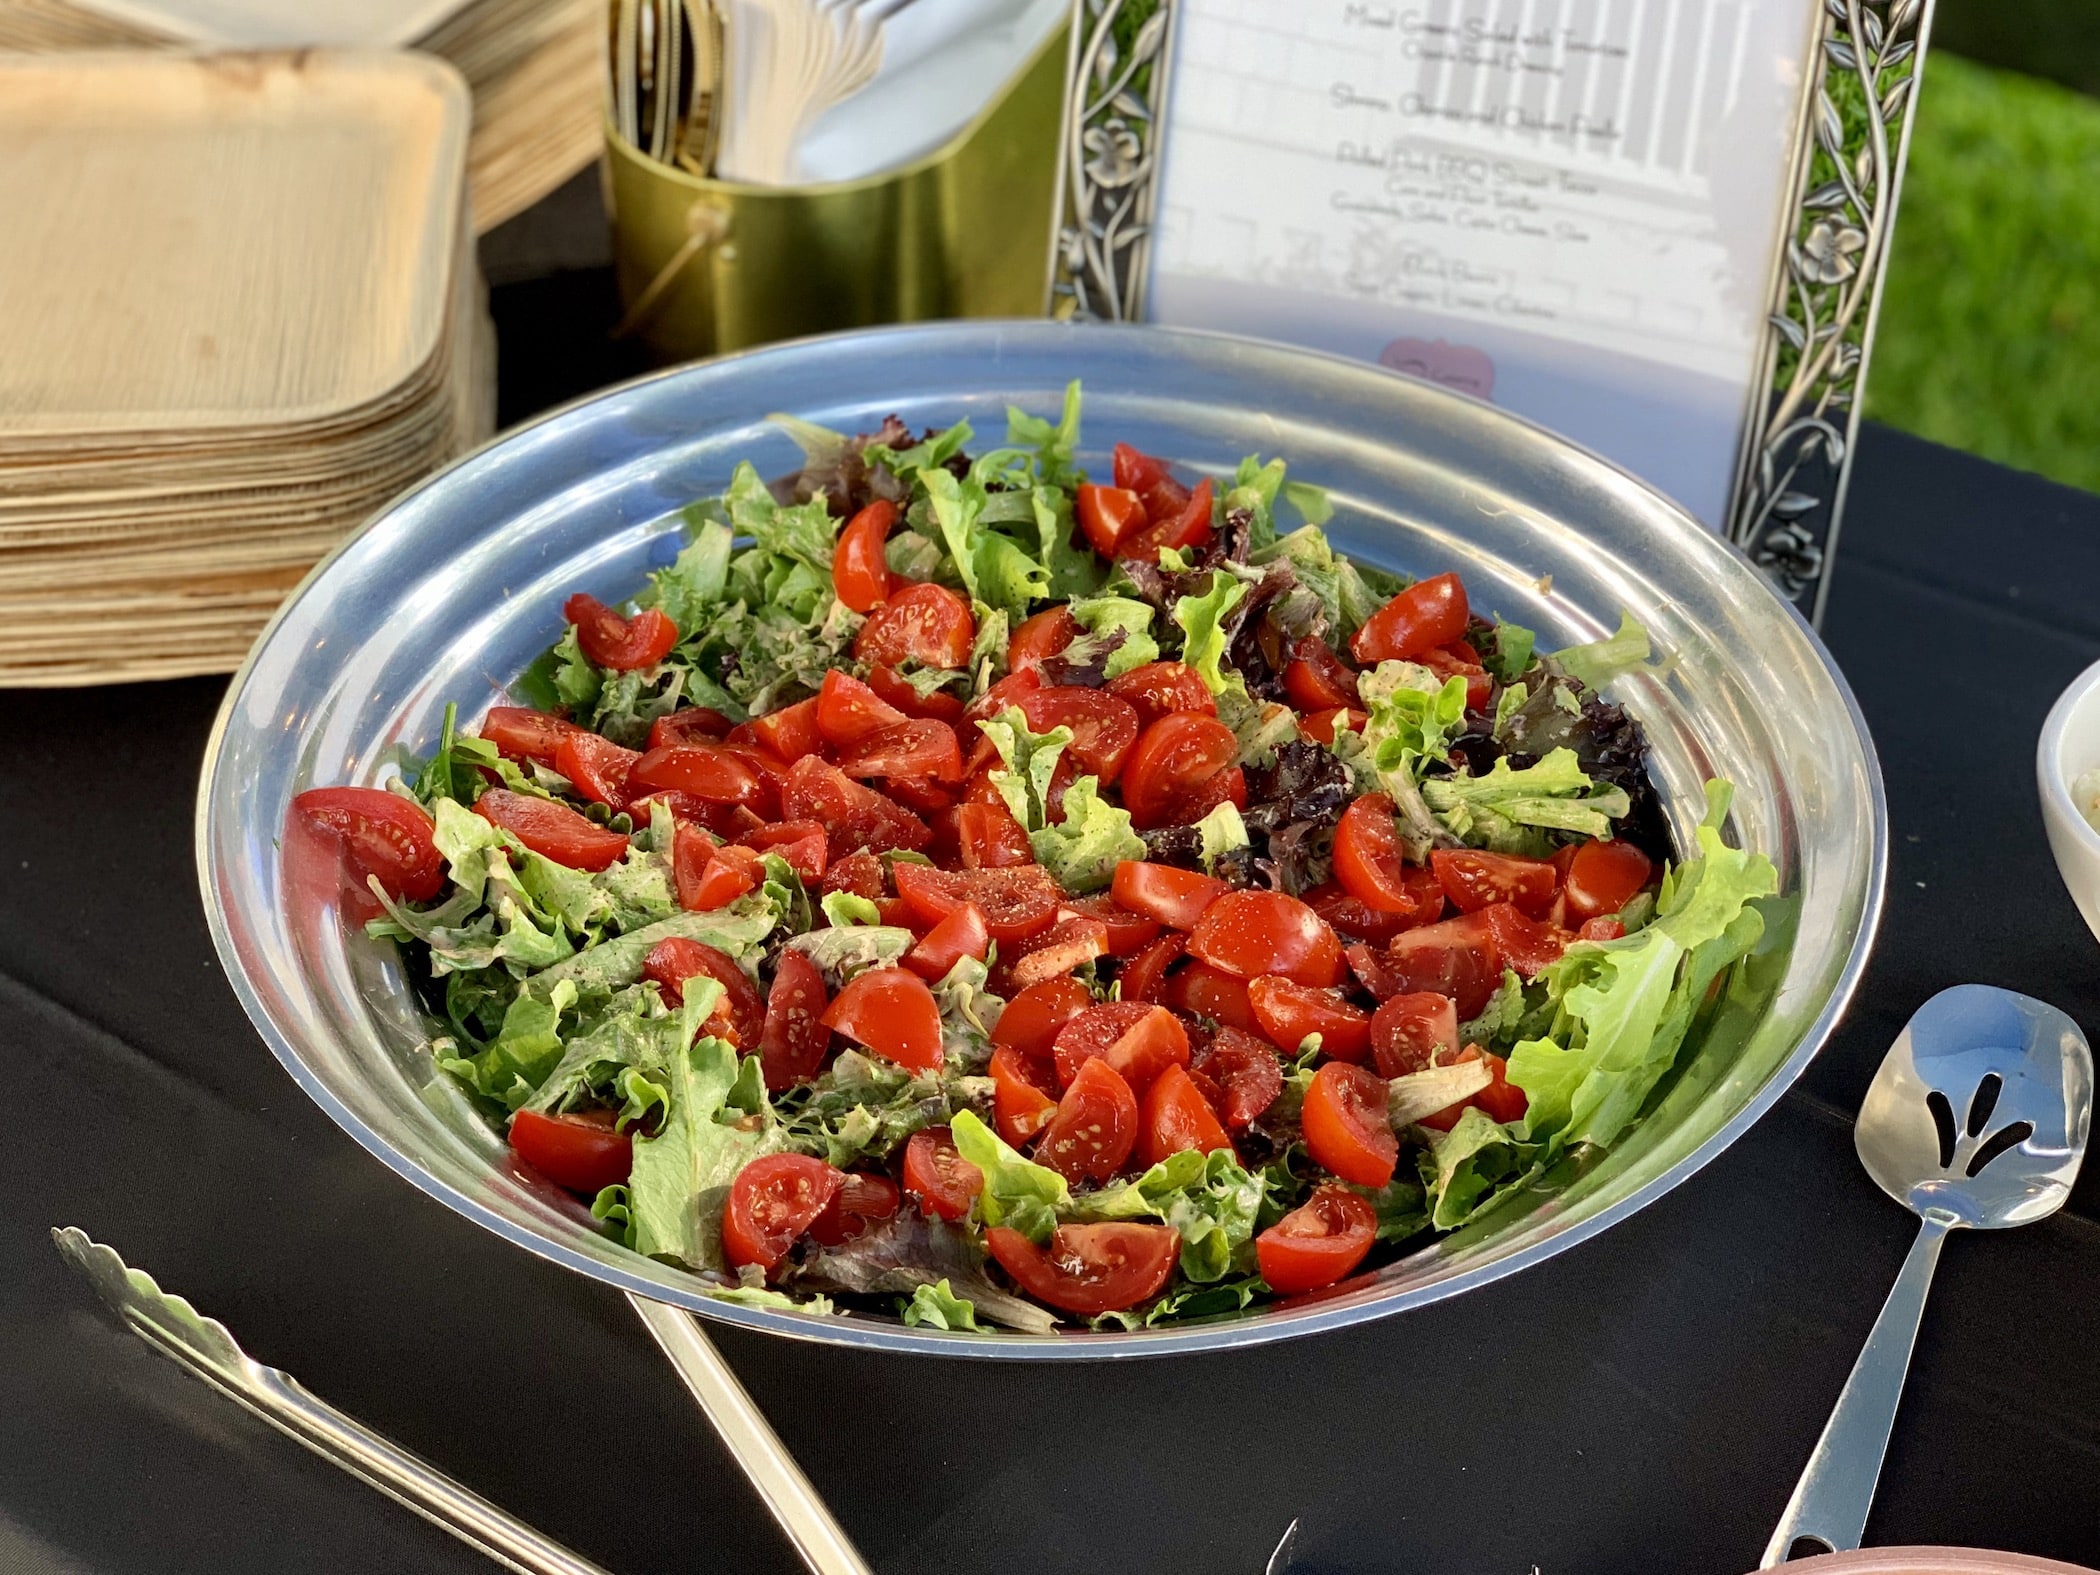 Mixed greens teamed with tomatoes. Served with your choice of salad dressing.